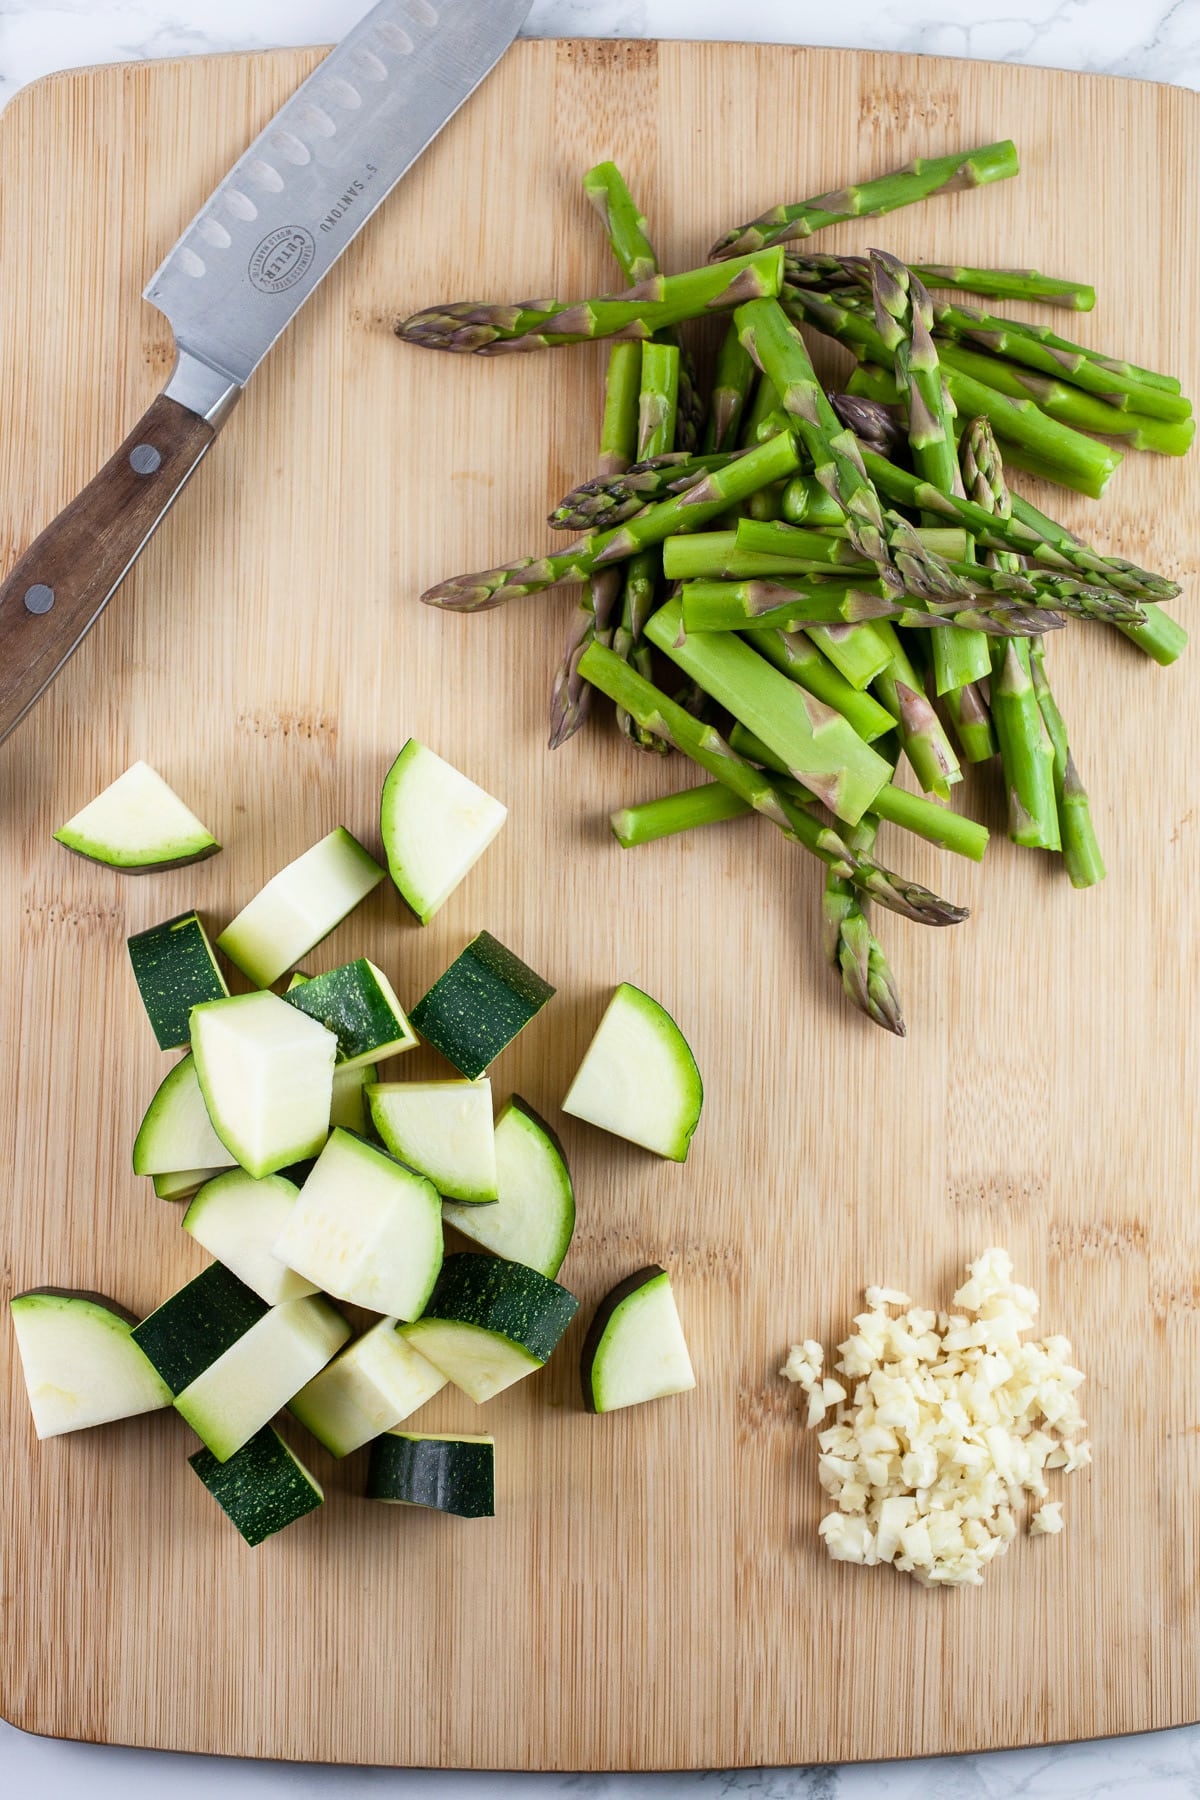 Minced garlic, diced zucchini, and chopped asparagus on wooden cutting board with knife.